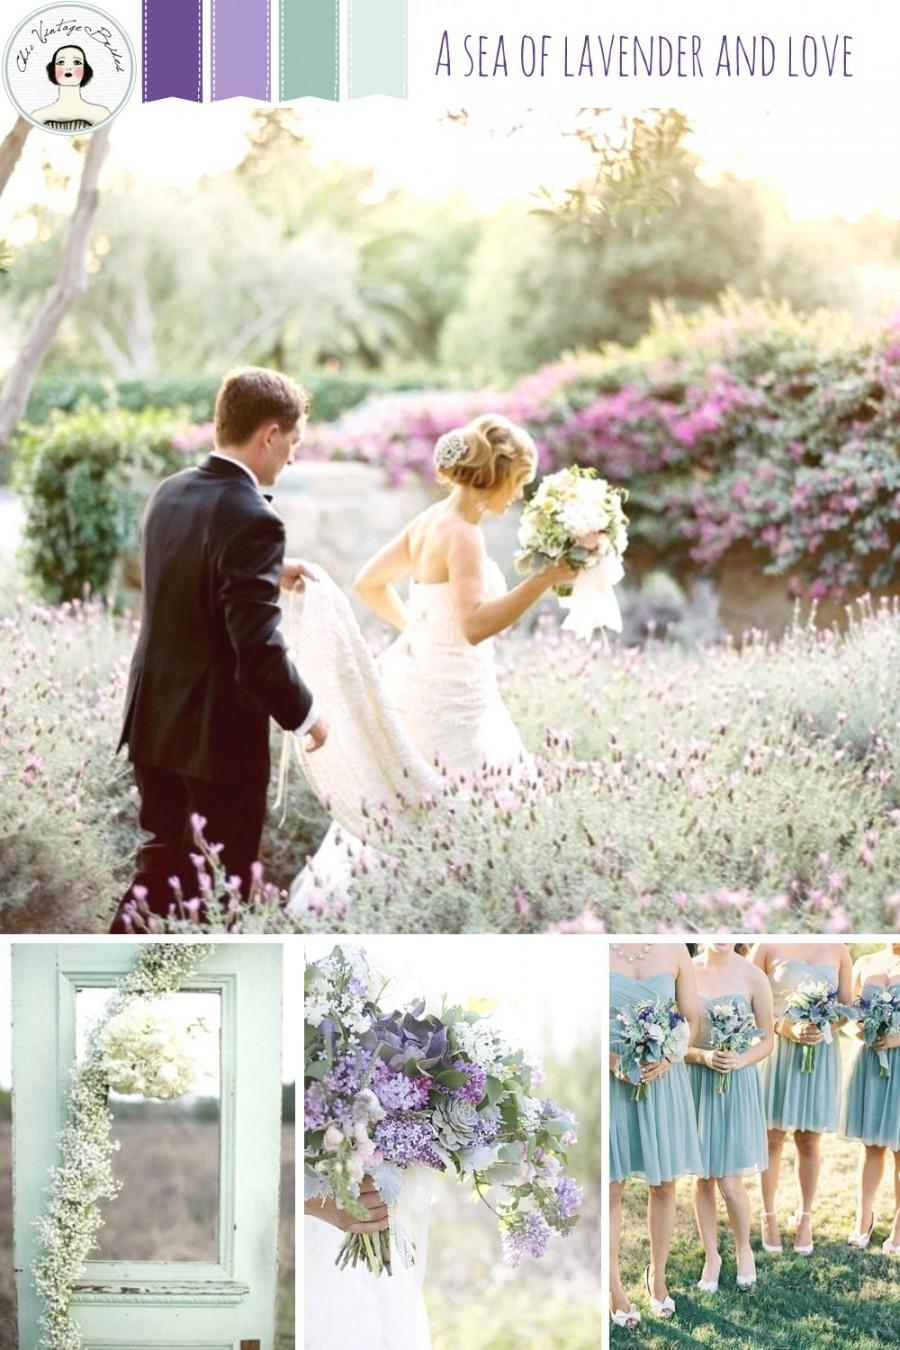 Mariage - A Sea of Lavender and Love - Romantic Wedding Inspiration in Shades of Lavender and Seafoam